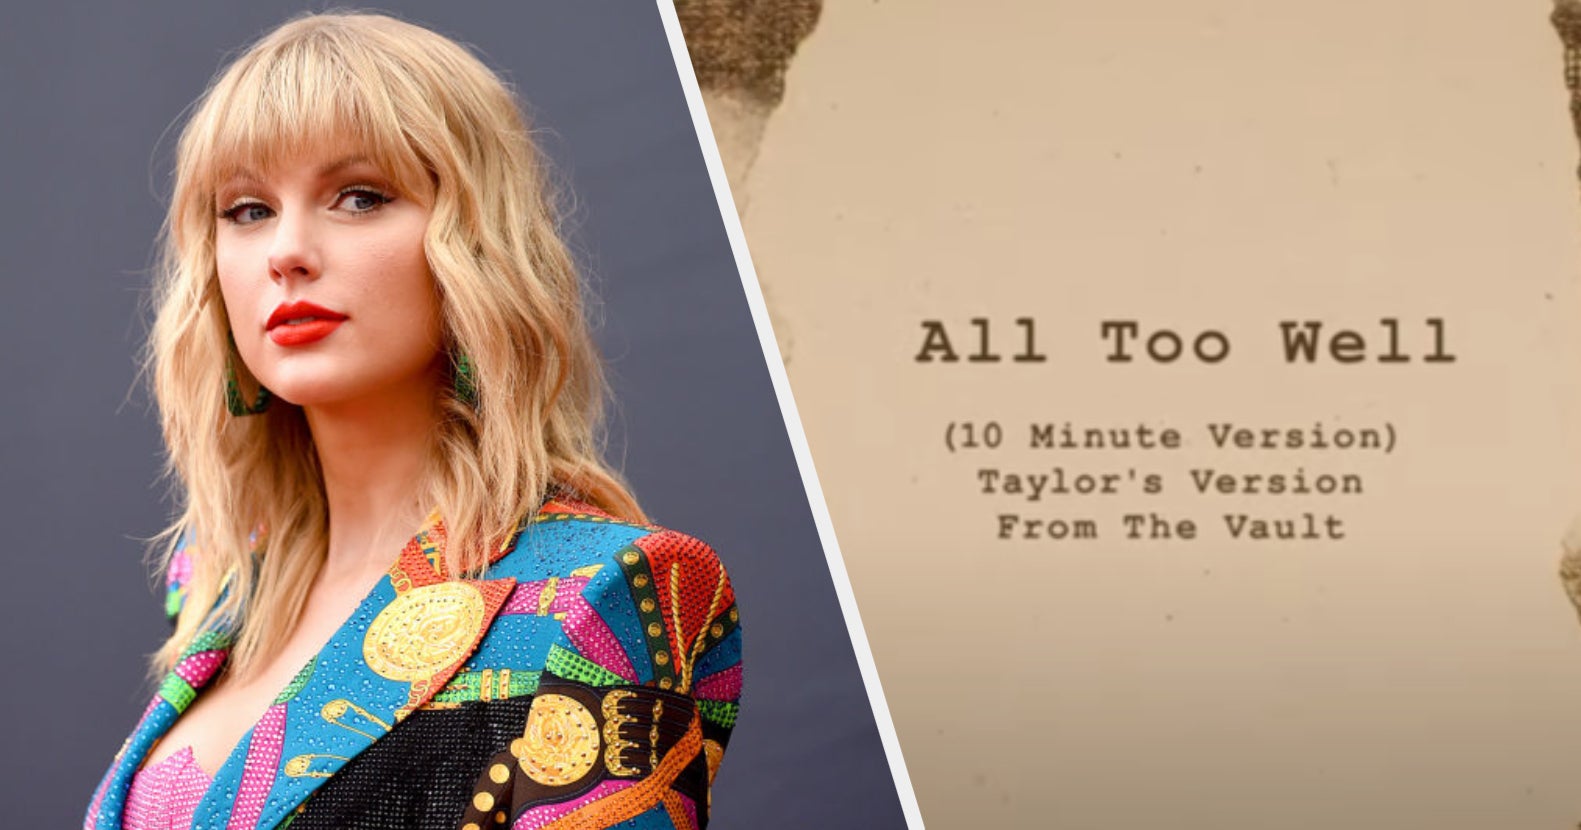 Taylor Swift's You're on Your Own, Kid Song Lyrics, Explained